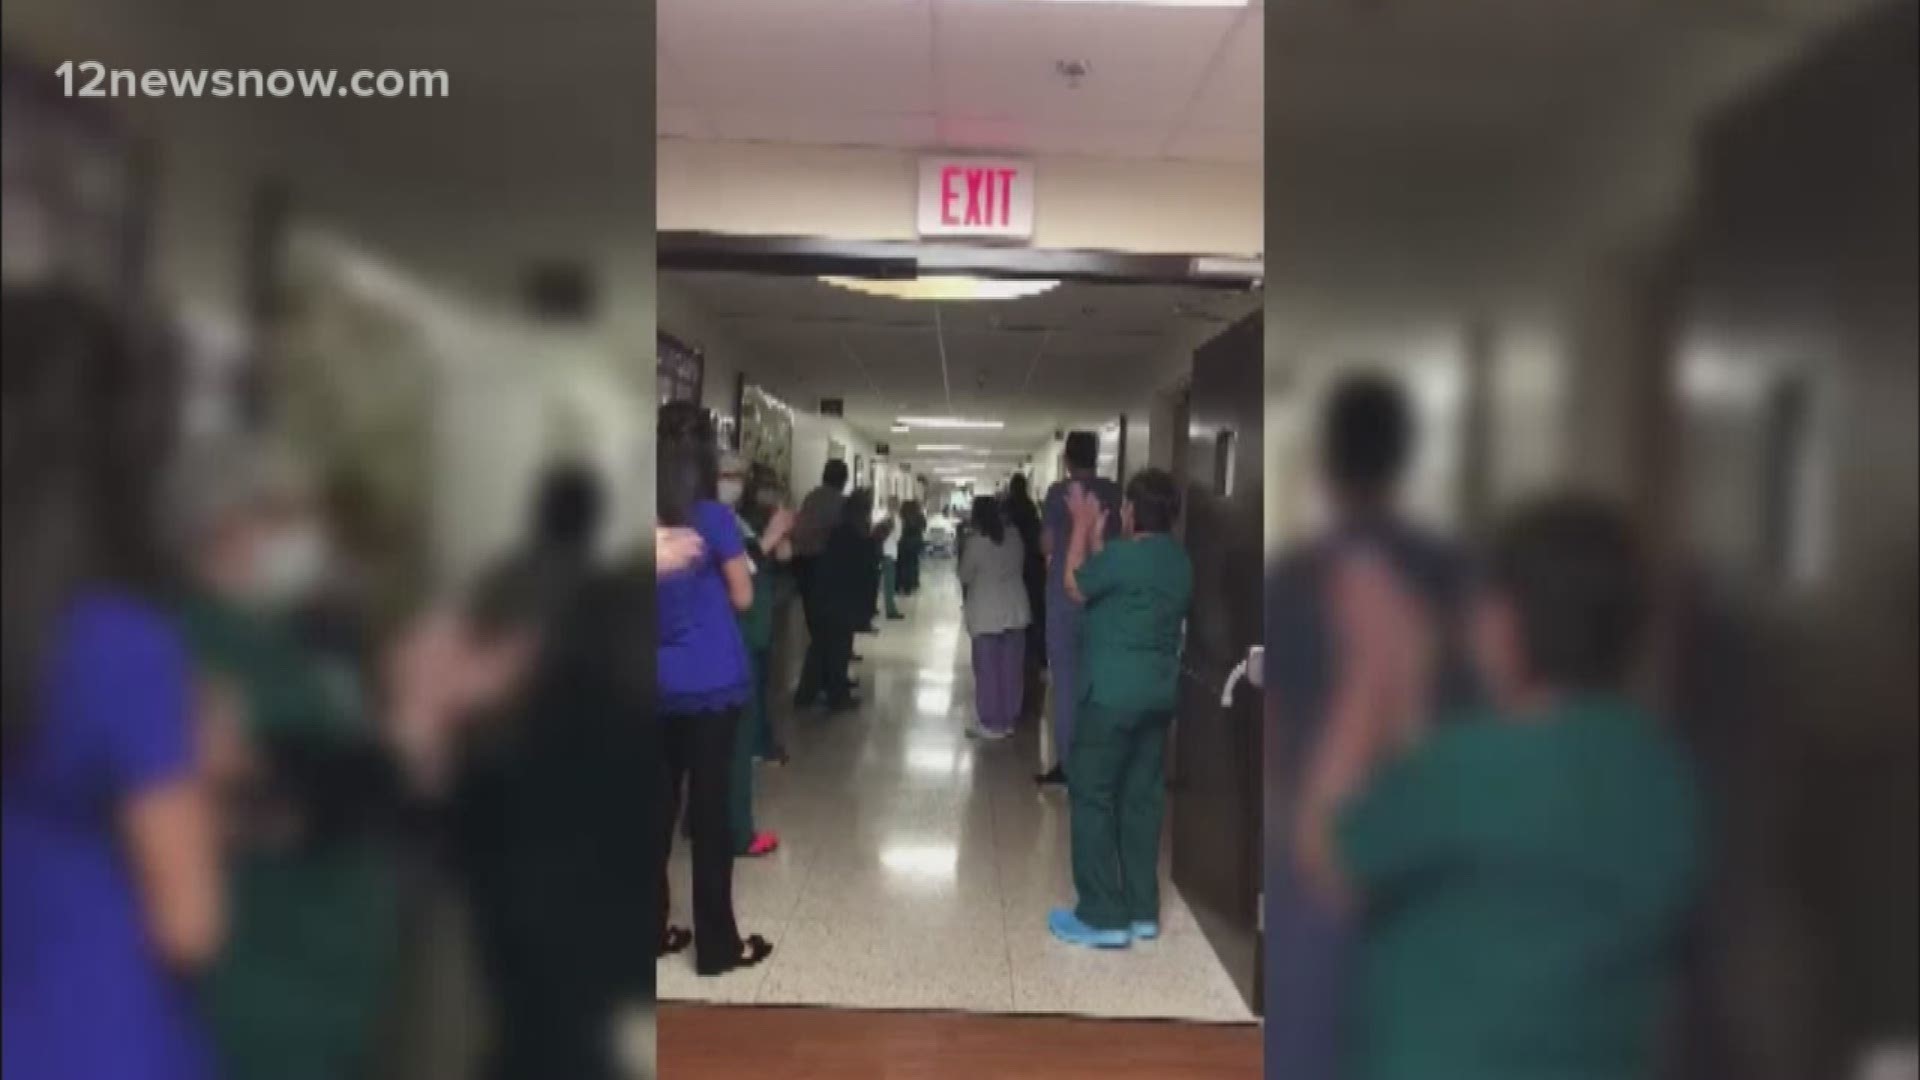 The nurses cheered her on as she was moved